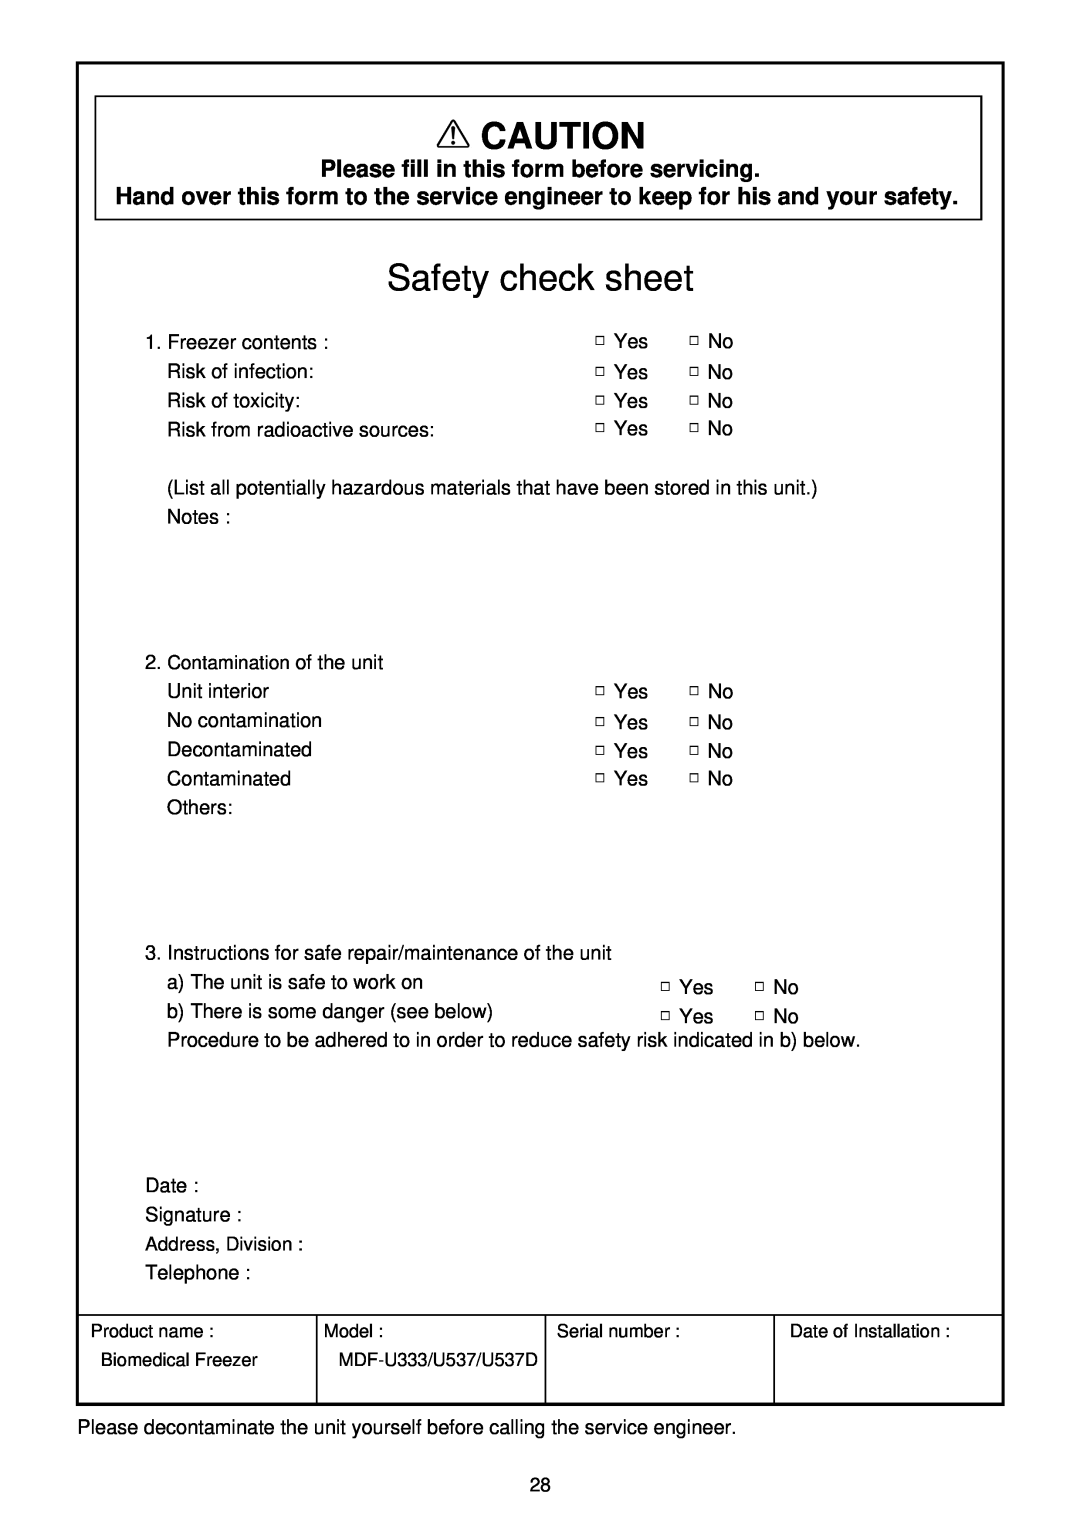 Sanyo MDF-U333, MDF-U537 instruction manual Safety check sheet, Please fill in this form before servicing 